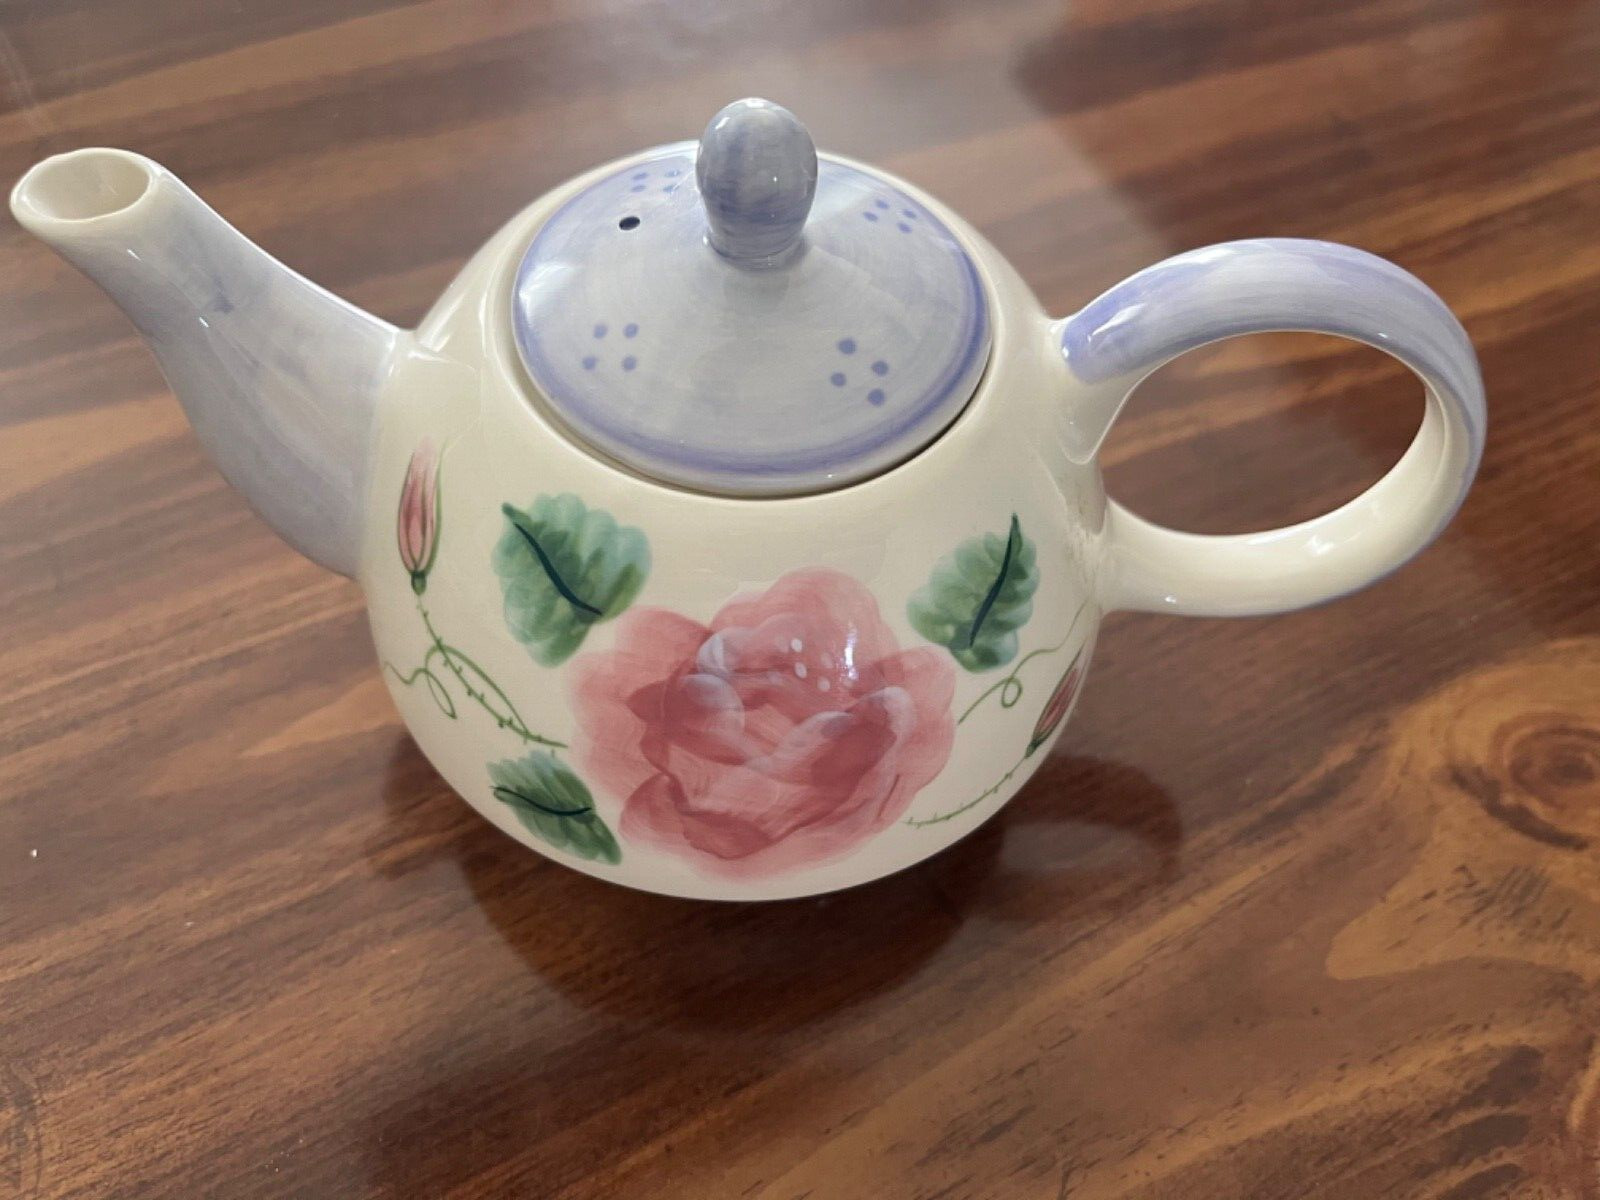 Hermon Dodge and Son Hand-painted Teapot w/ Lid - Pink & Lavender Rose Flower